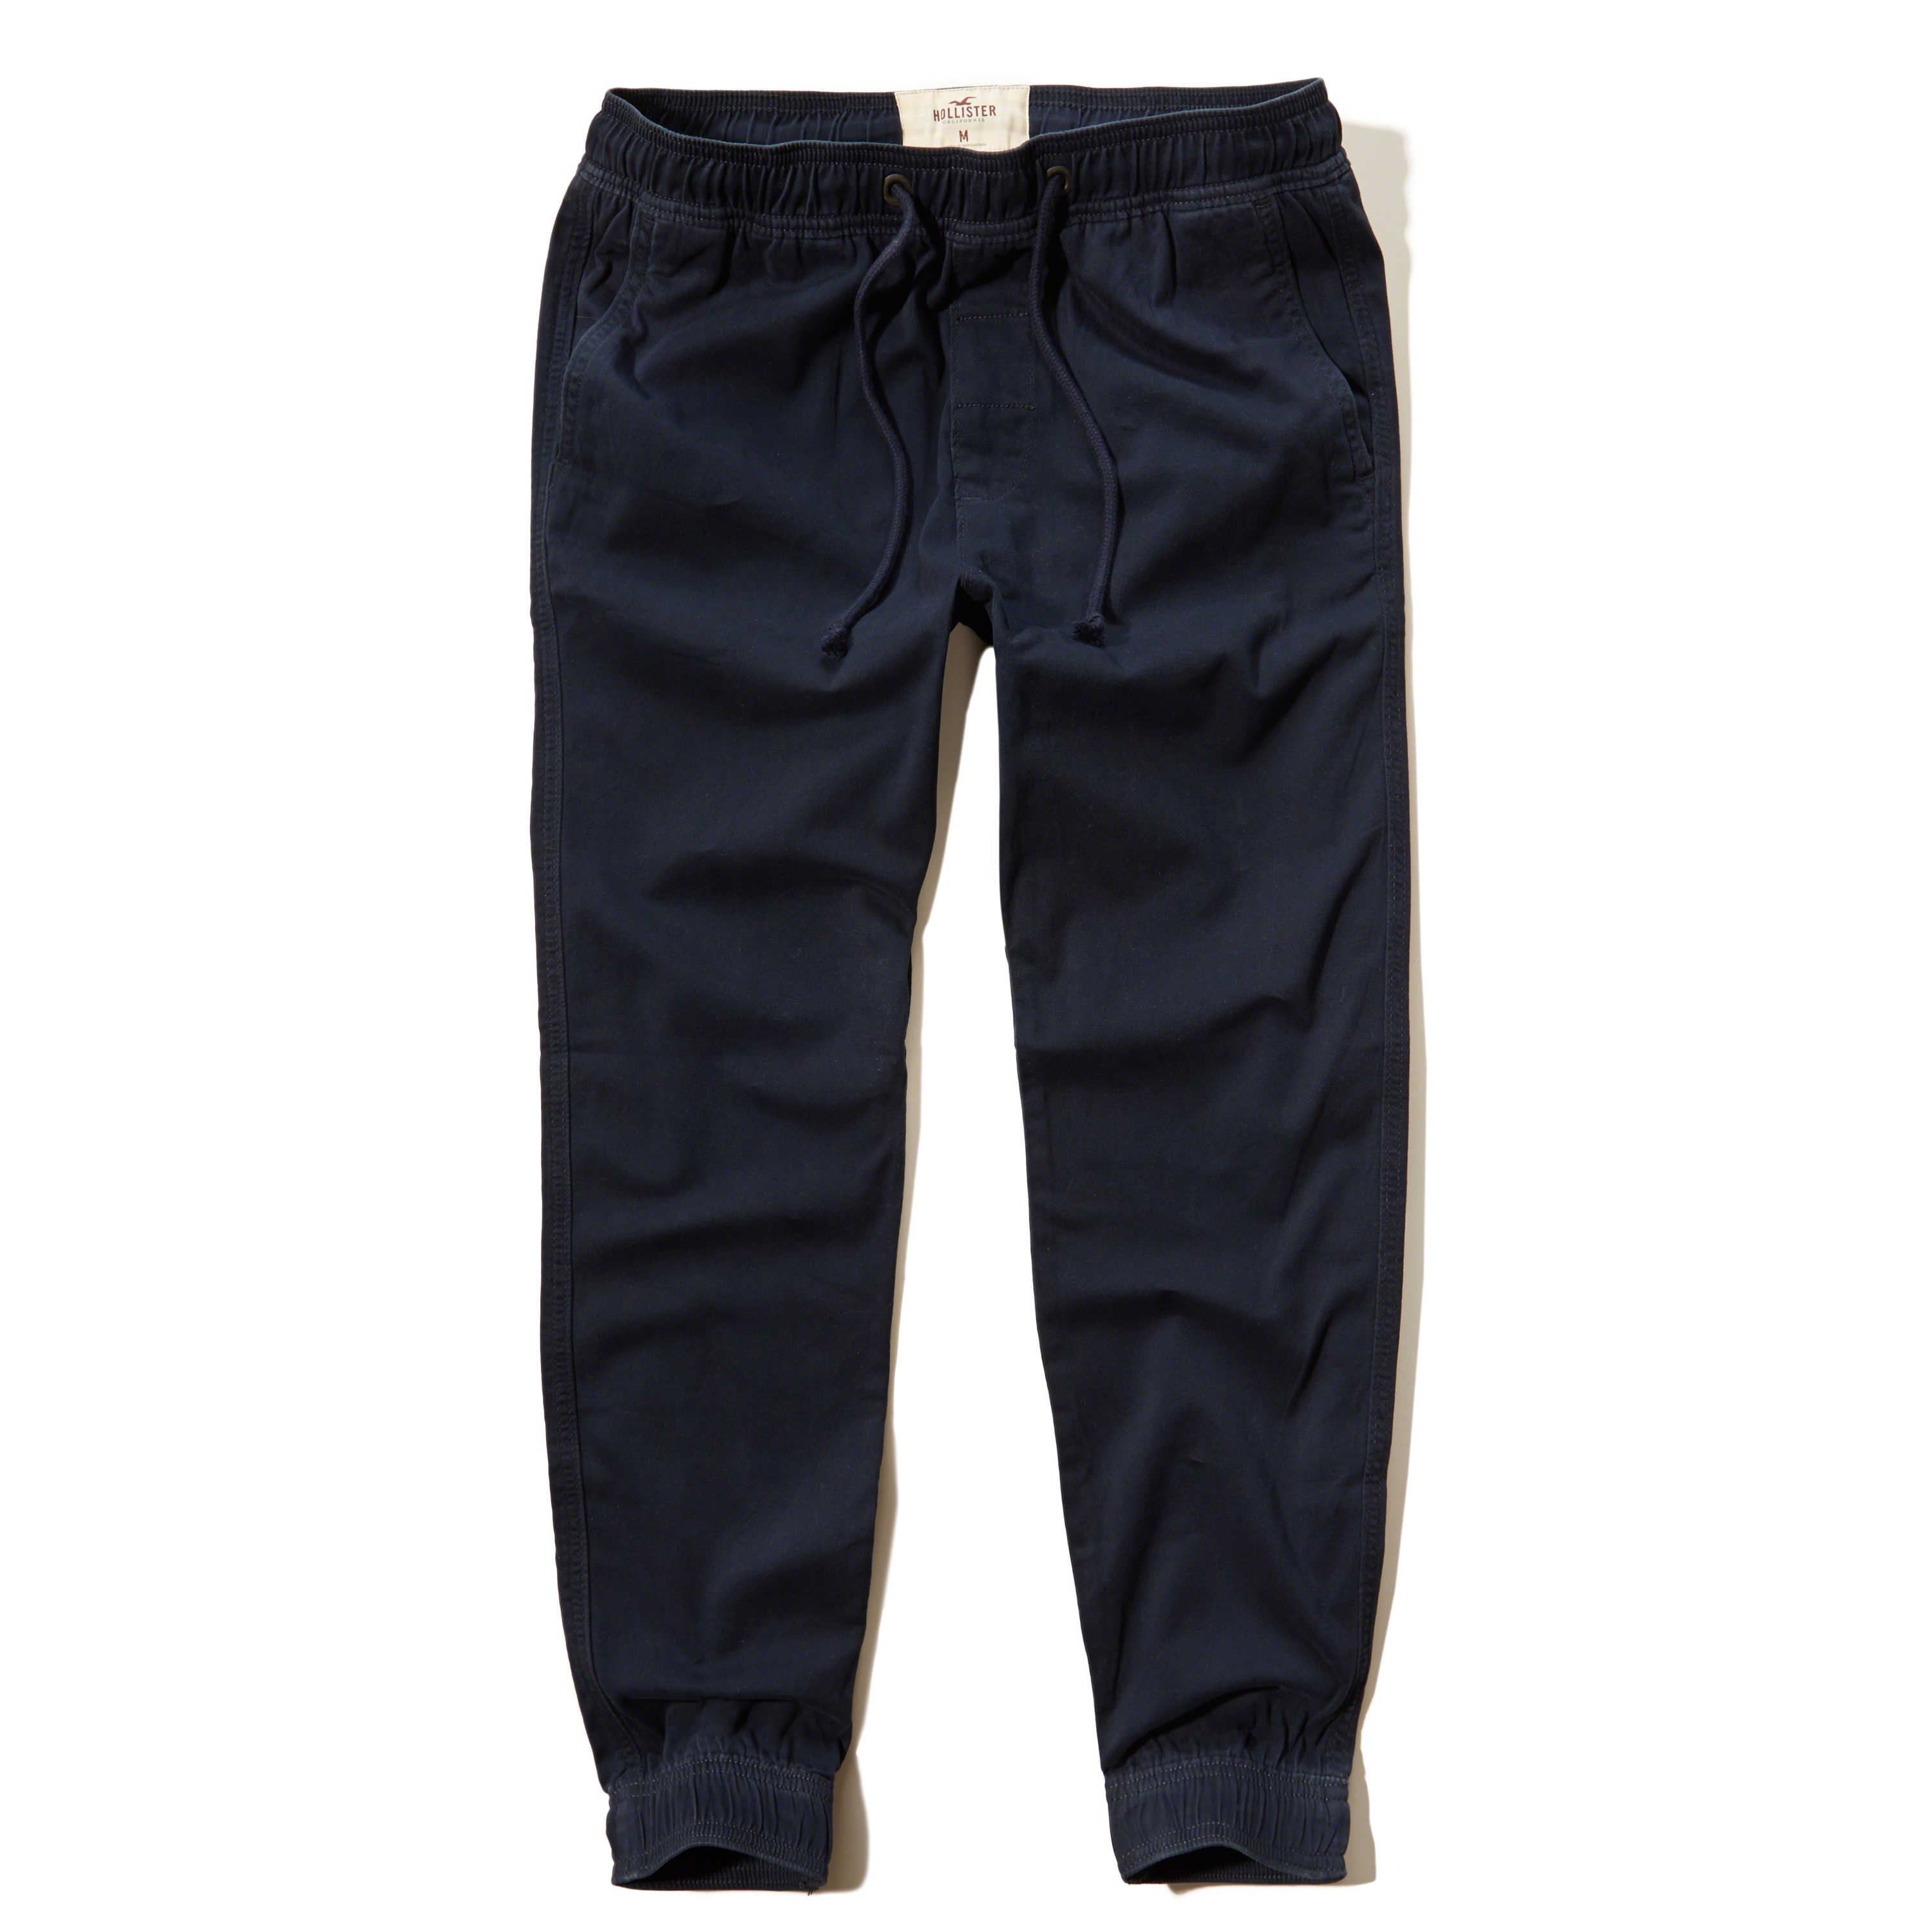 Lyst - Hollister Pull-on Twill Jogger Pants in Blue for Men